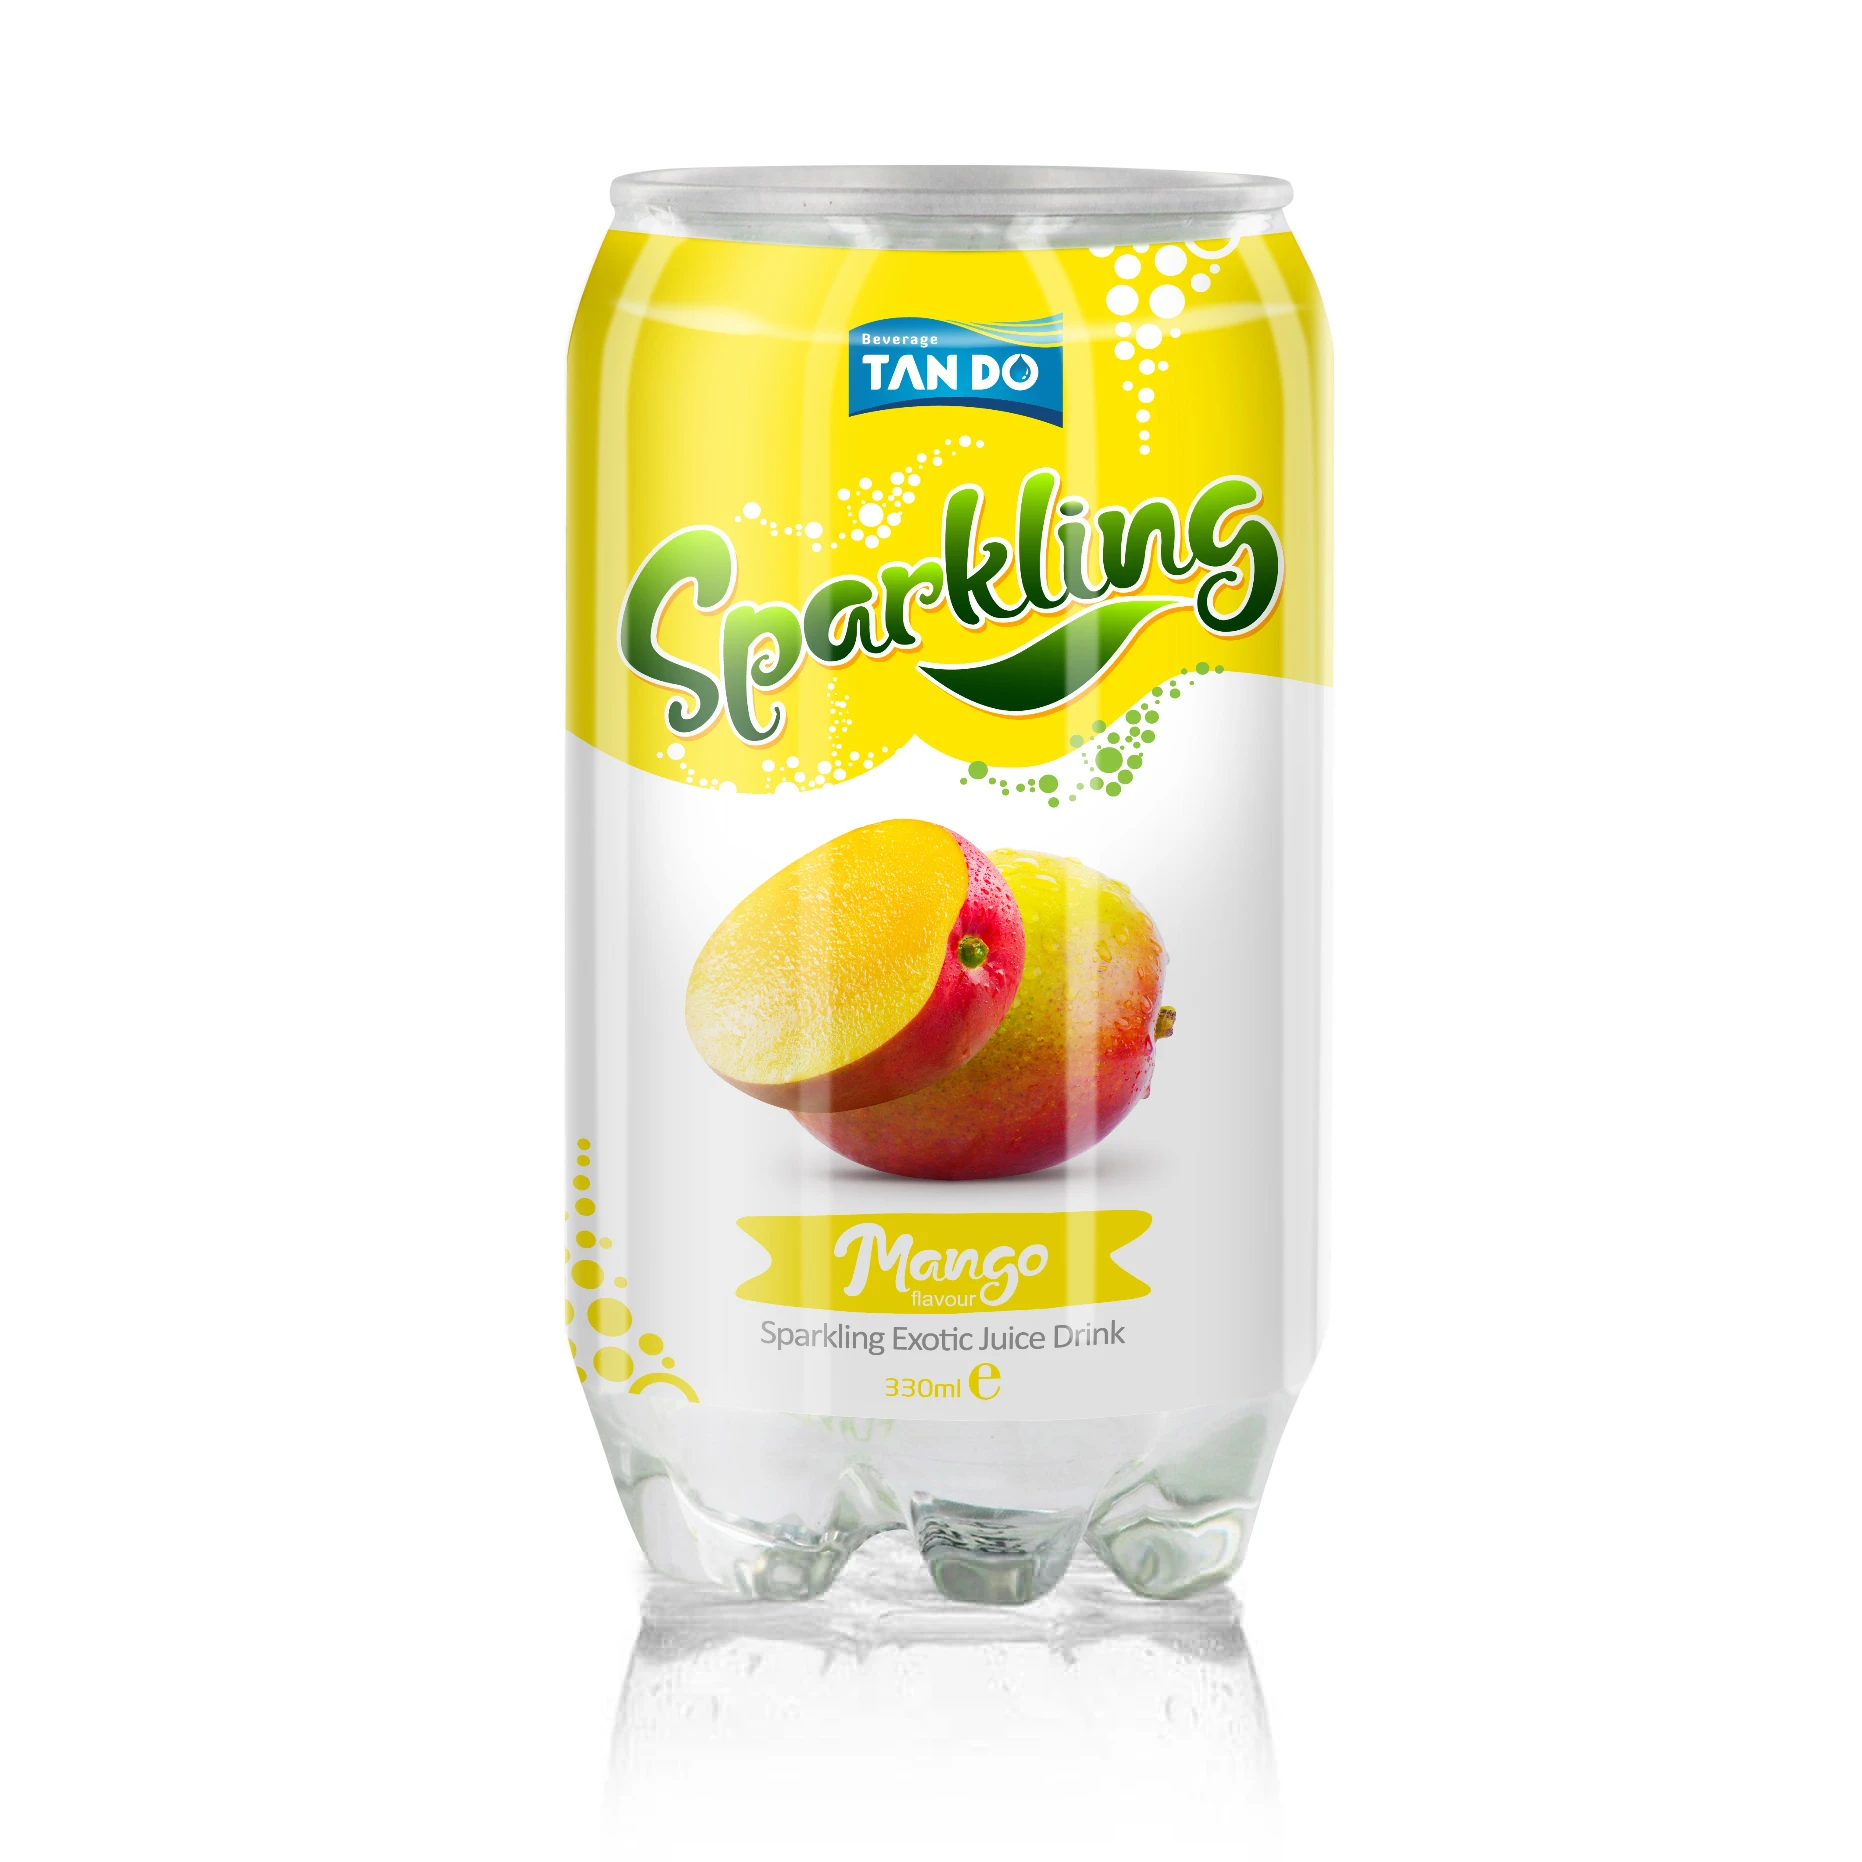 Tan Do Beverage Company supply OEM sparkling juice drink pack in PET can